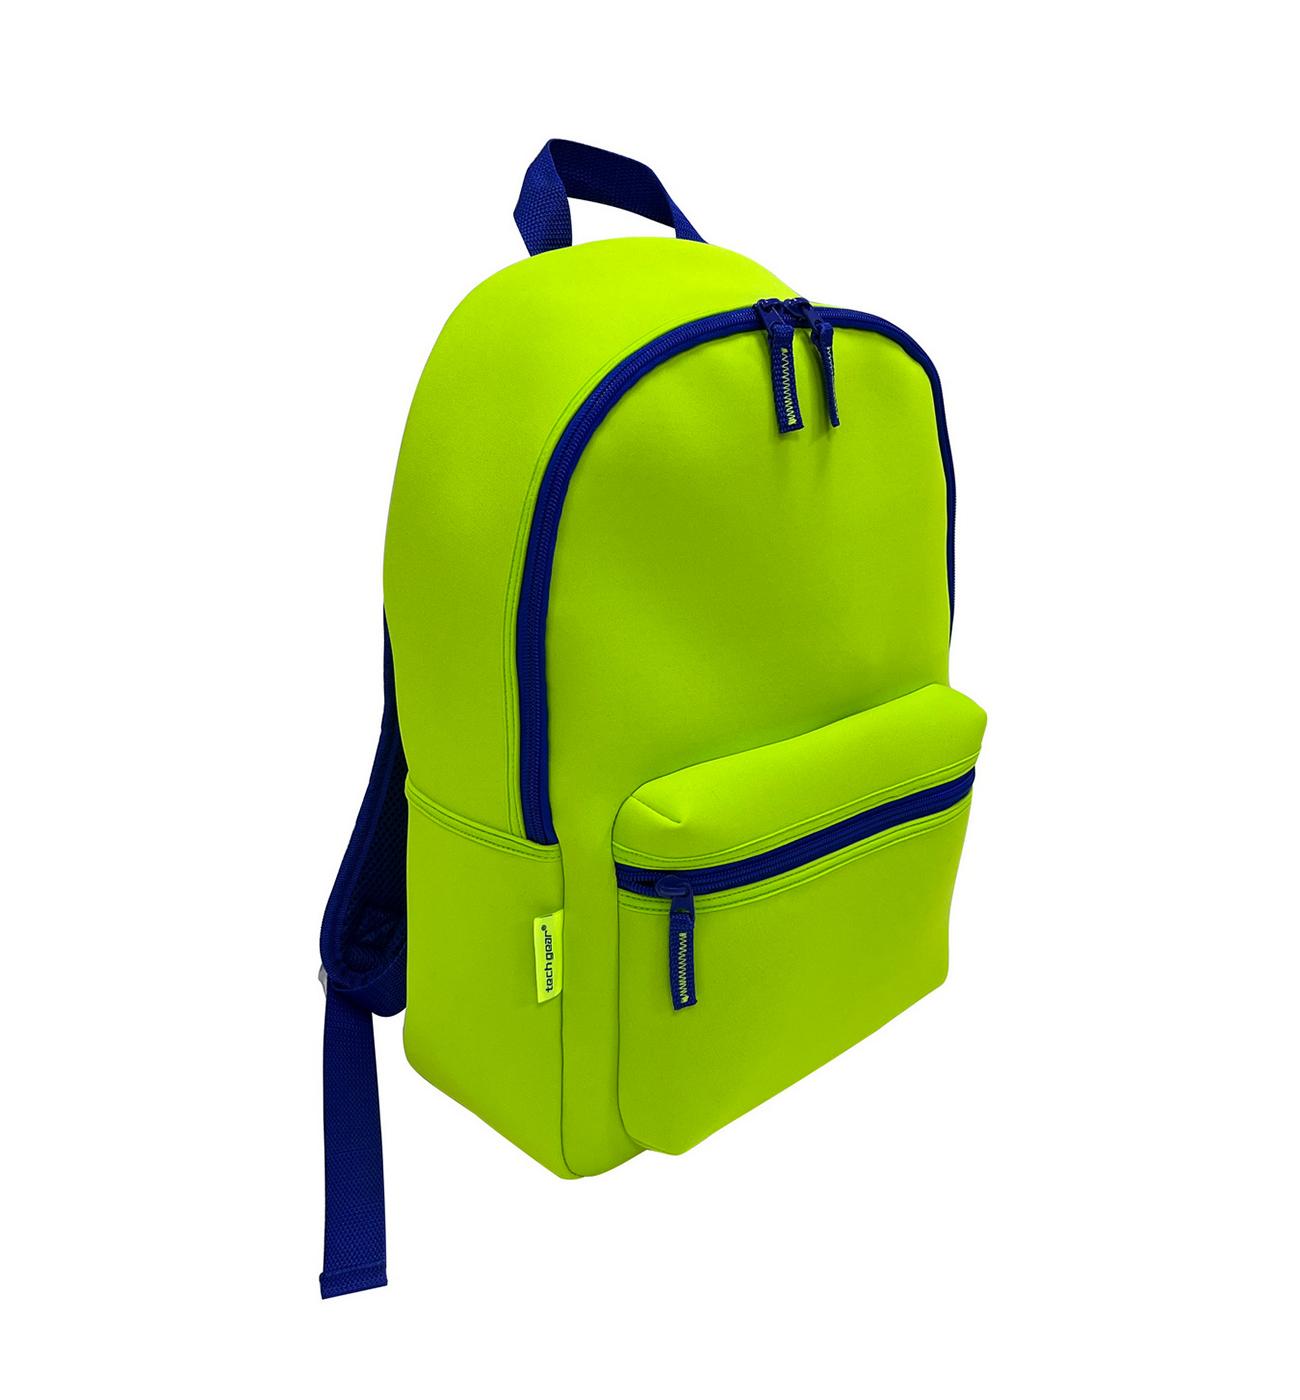 Tech Gear Wetsuit Backpack - Green & Blue; image 3 of 3